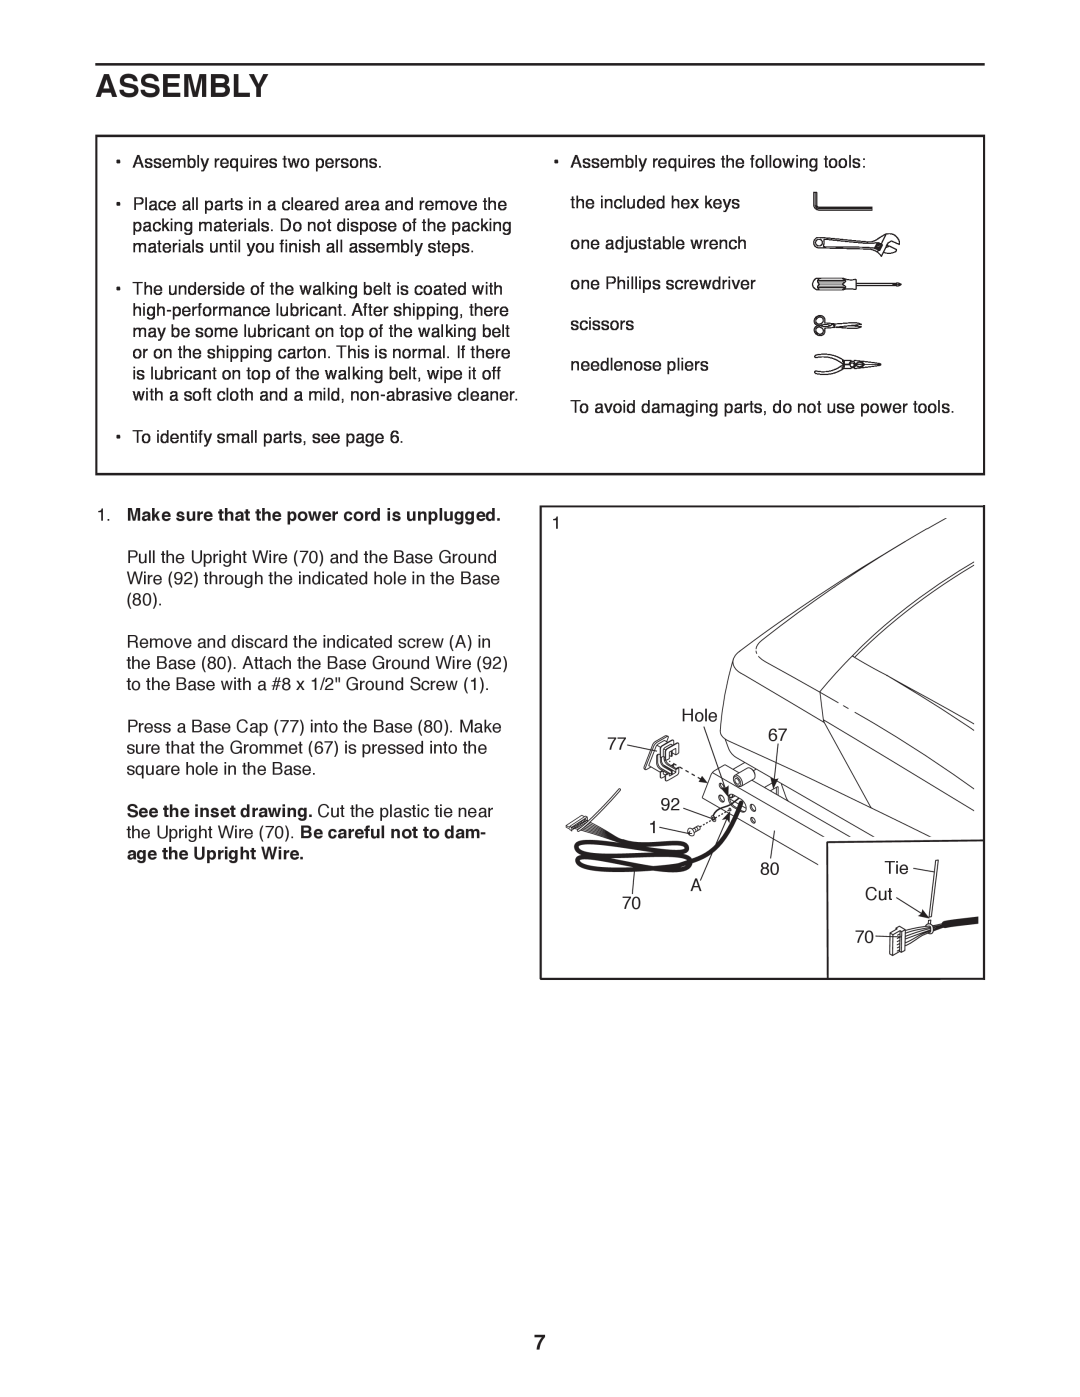 Sears NTL61011.1 user manual Assembly, Make sure that the power cord is unplugged, age the Upright Wire 